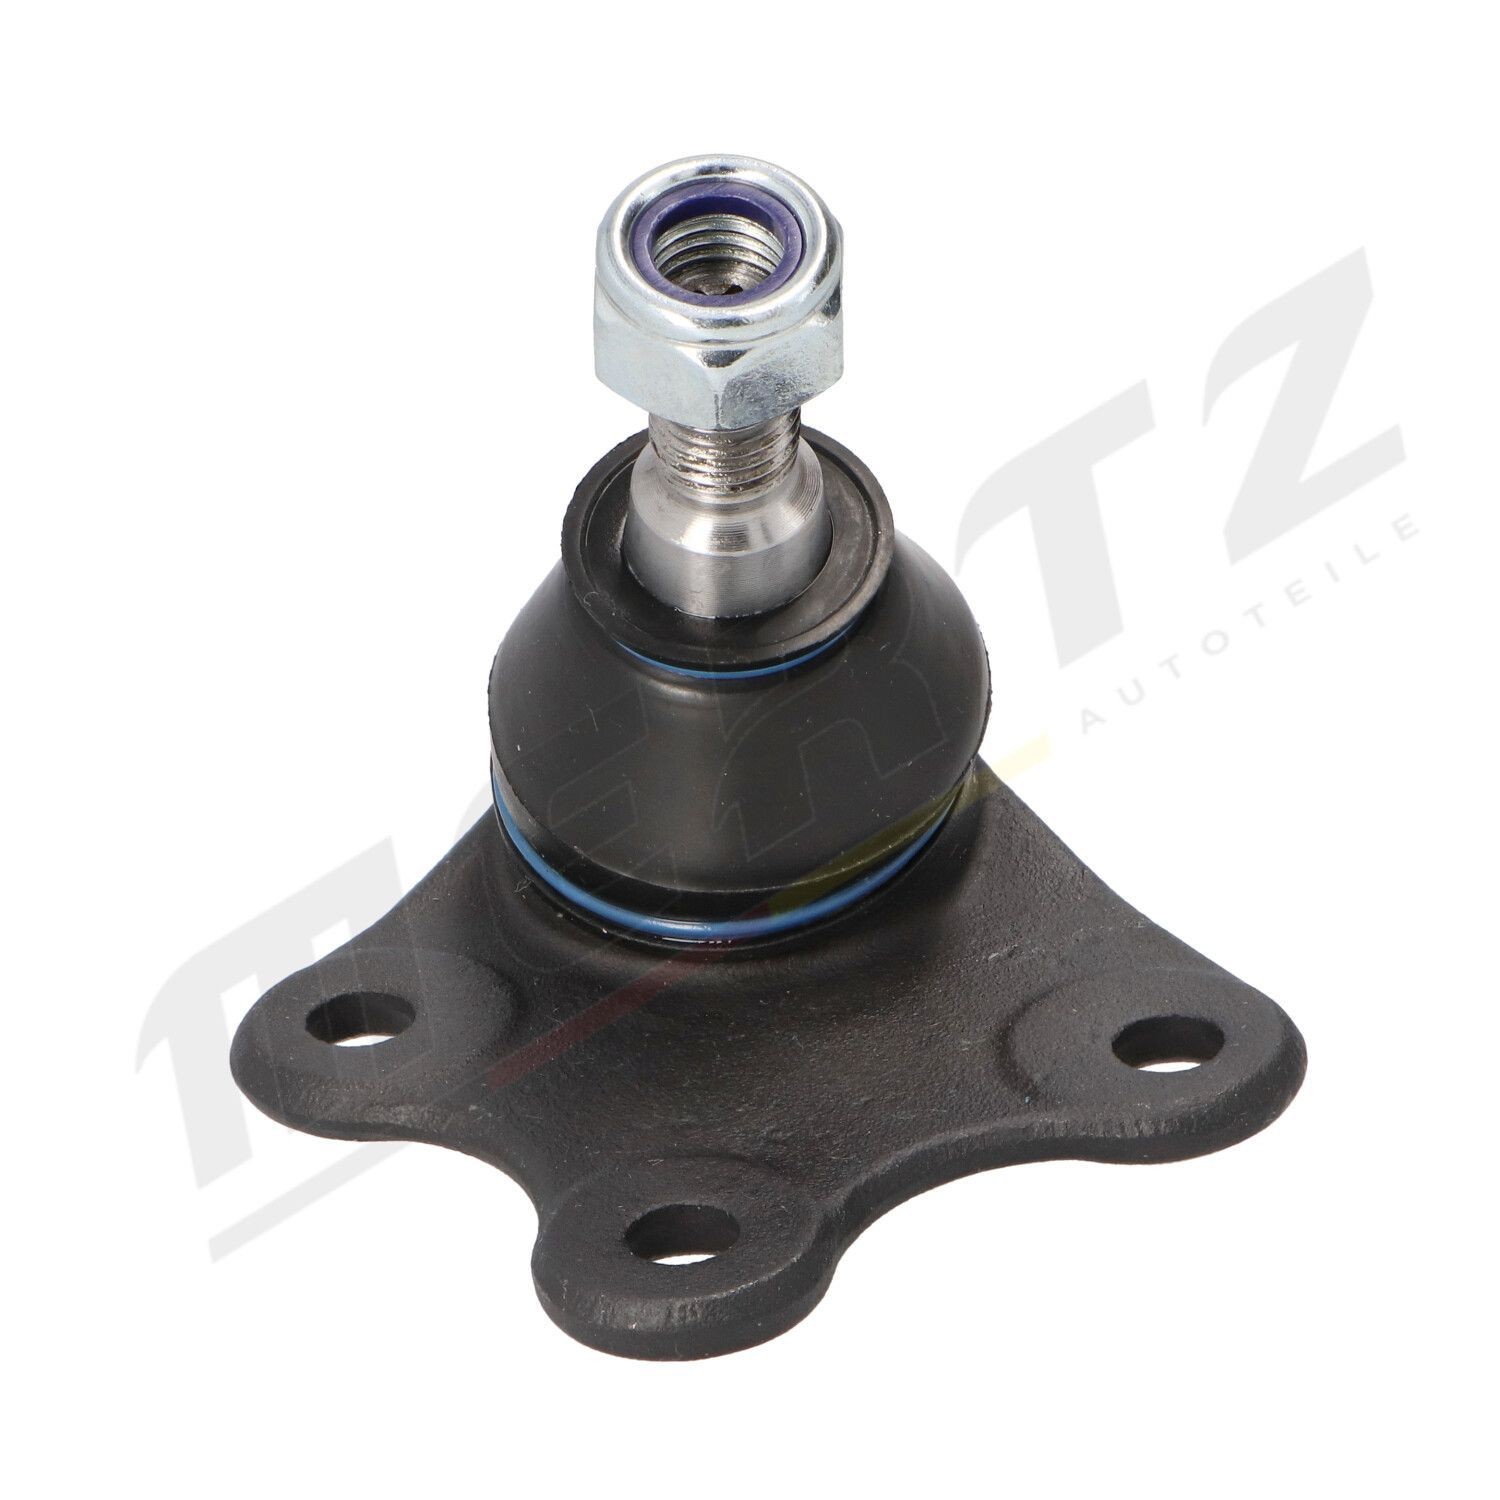 MS0191 Ball joint suspension arm MERTZ M-S0191 review and test